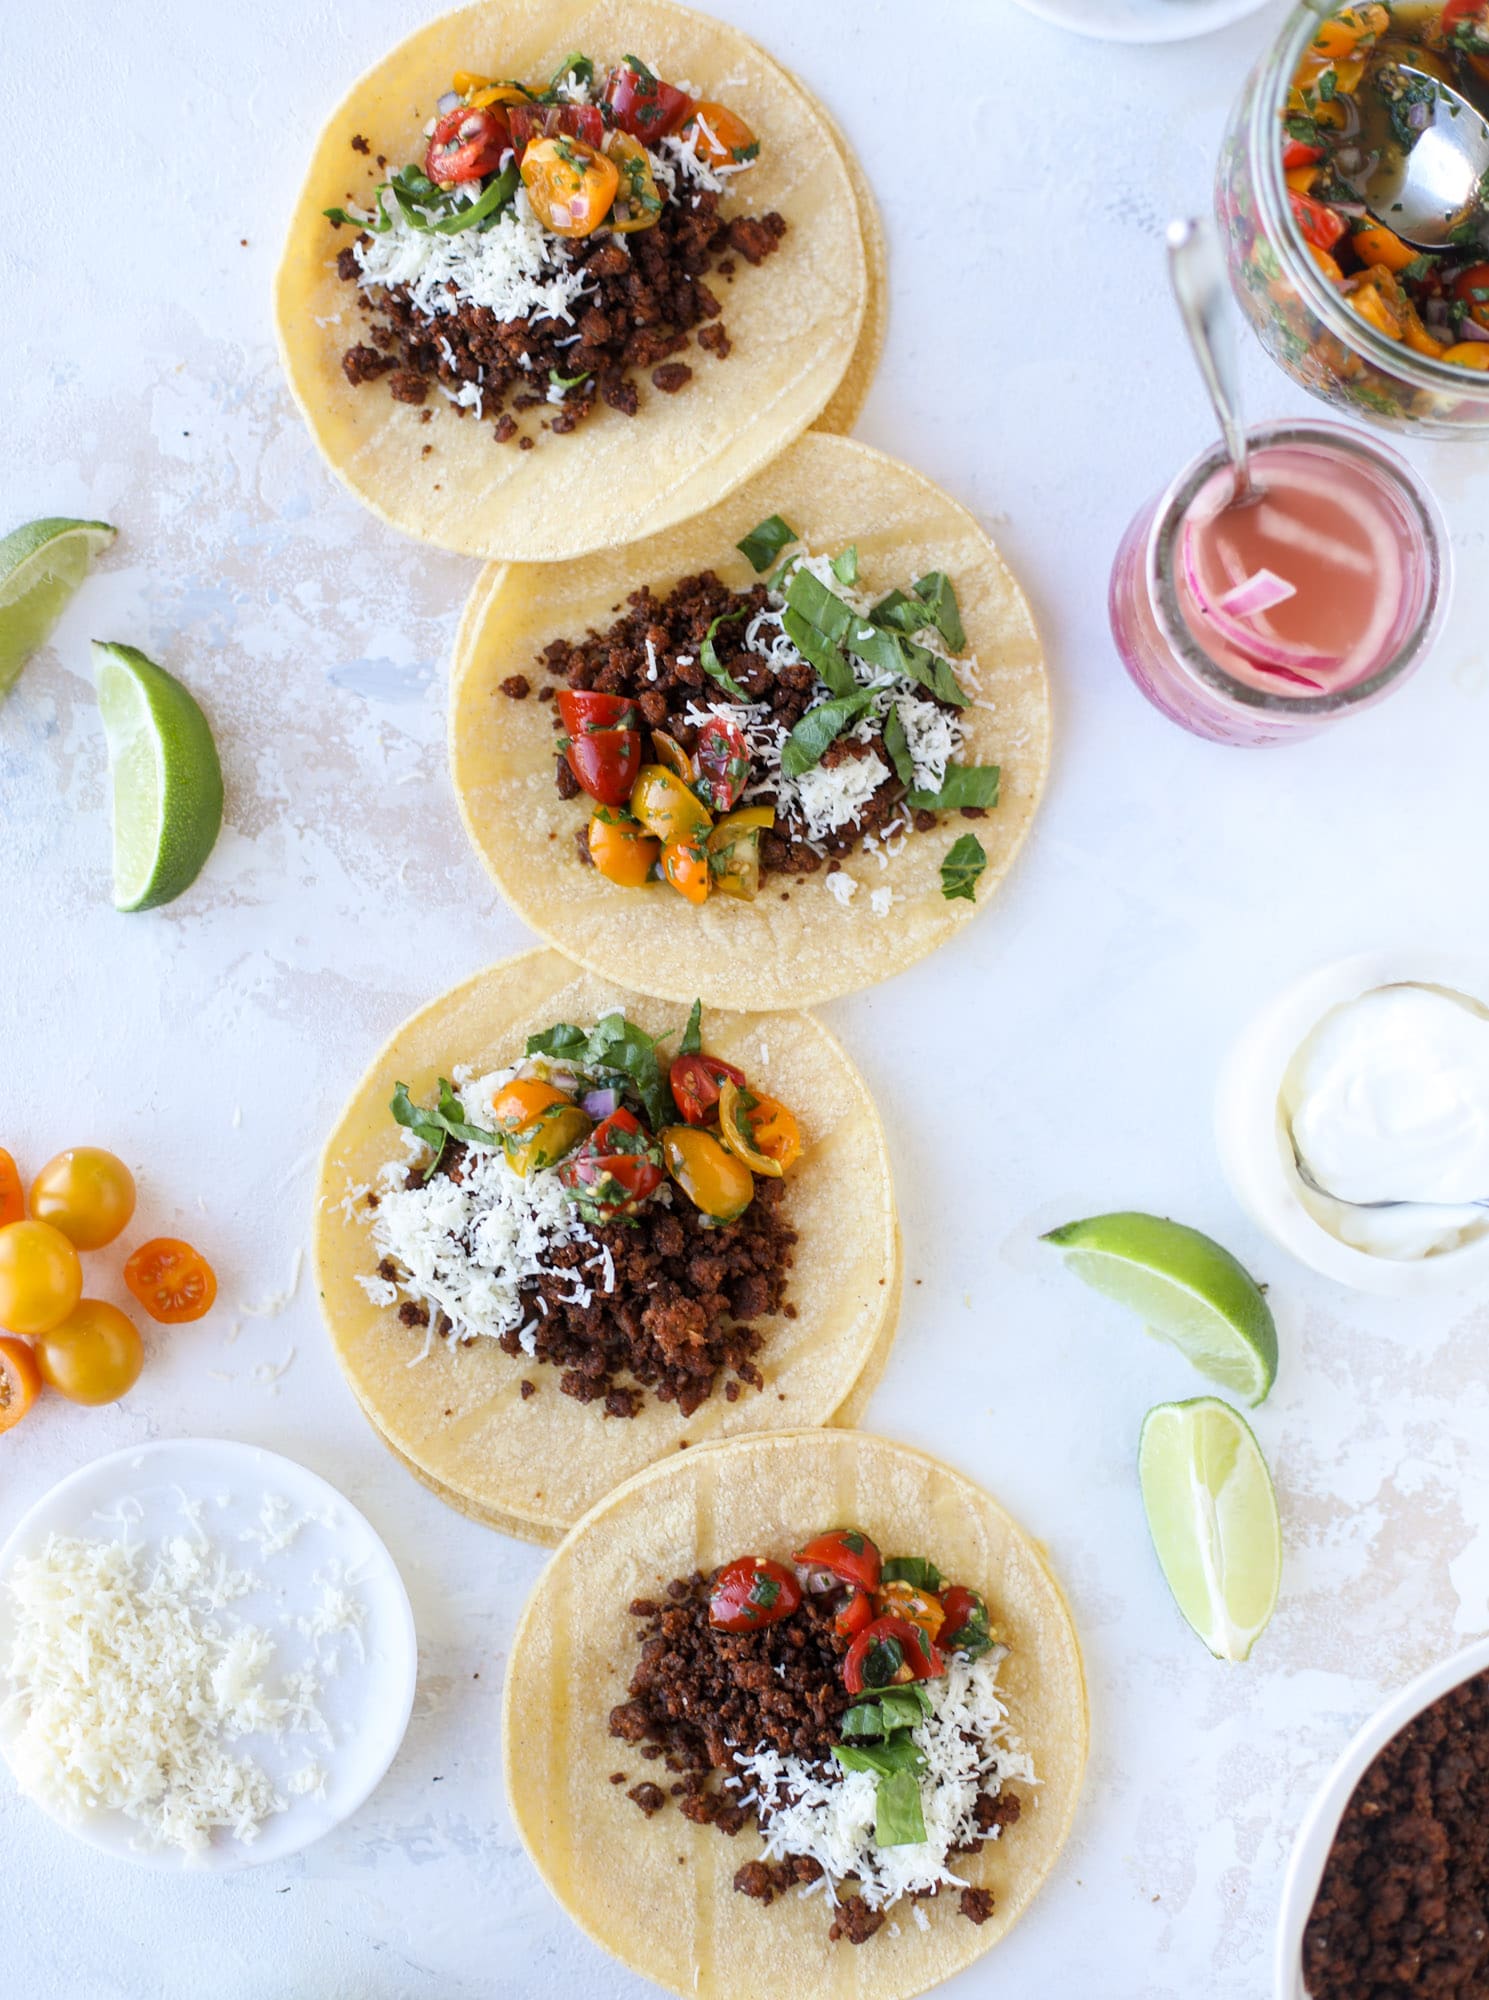 Weeknight ground beef tacos that are anything like the 90s! These are made with a homemade taco seasoning and served with the perfect toppings! I howsweeteats.com #groundbeef #tacos